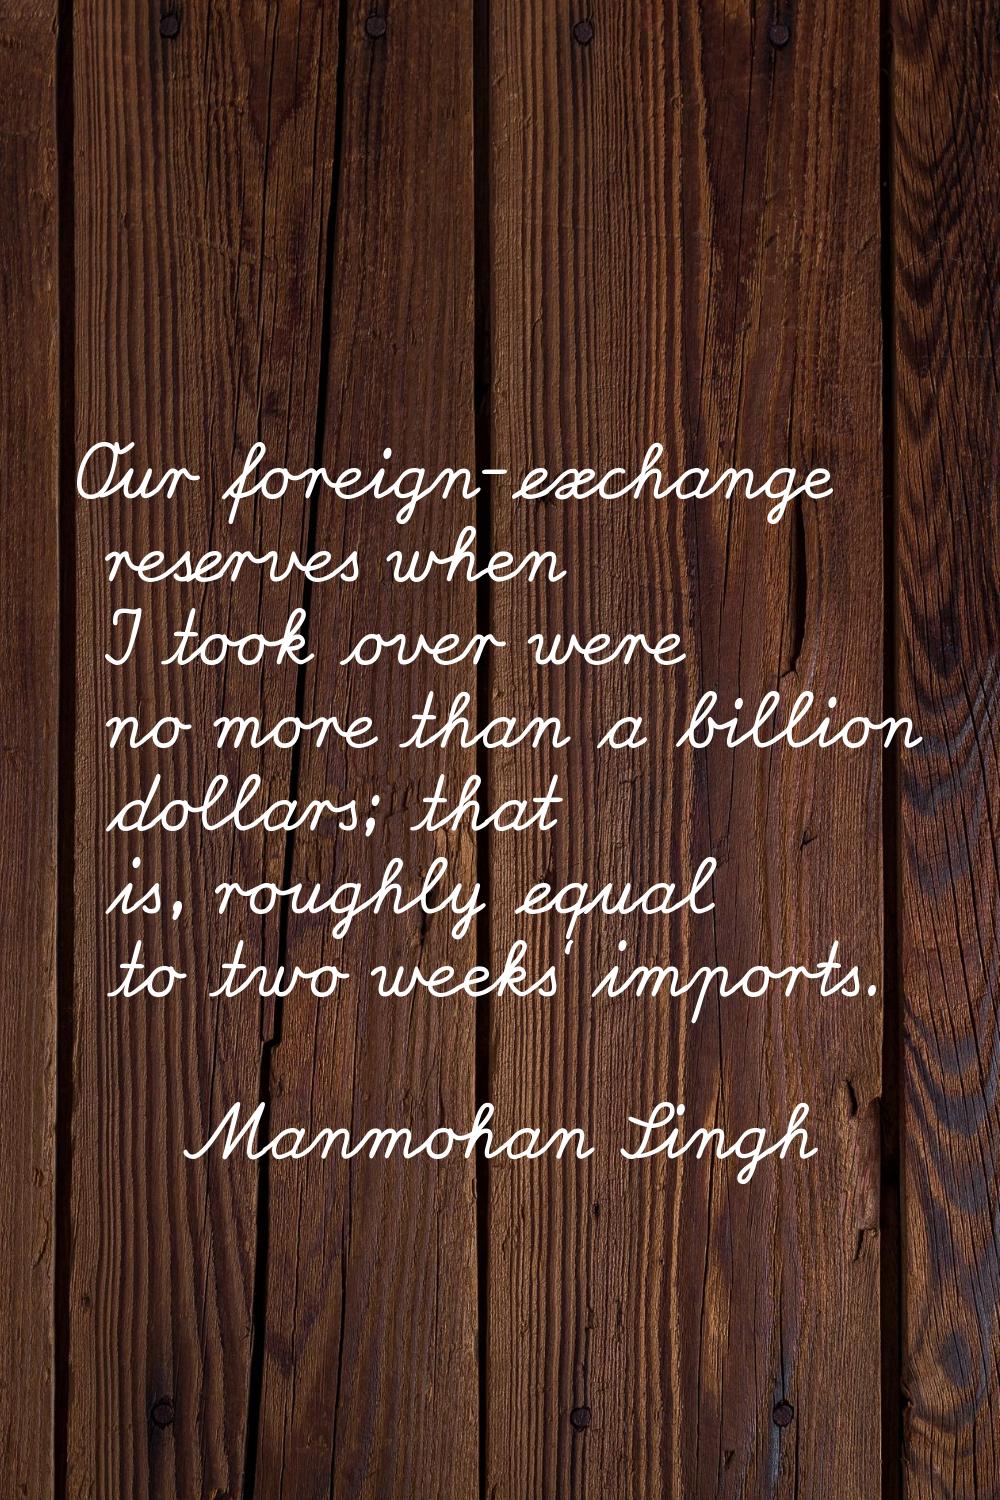 Our foreign-exchange reserves when I took over were no more than a billion dollars; that is, roughl